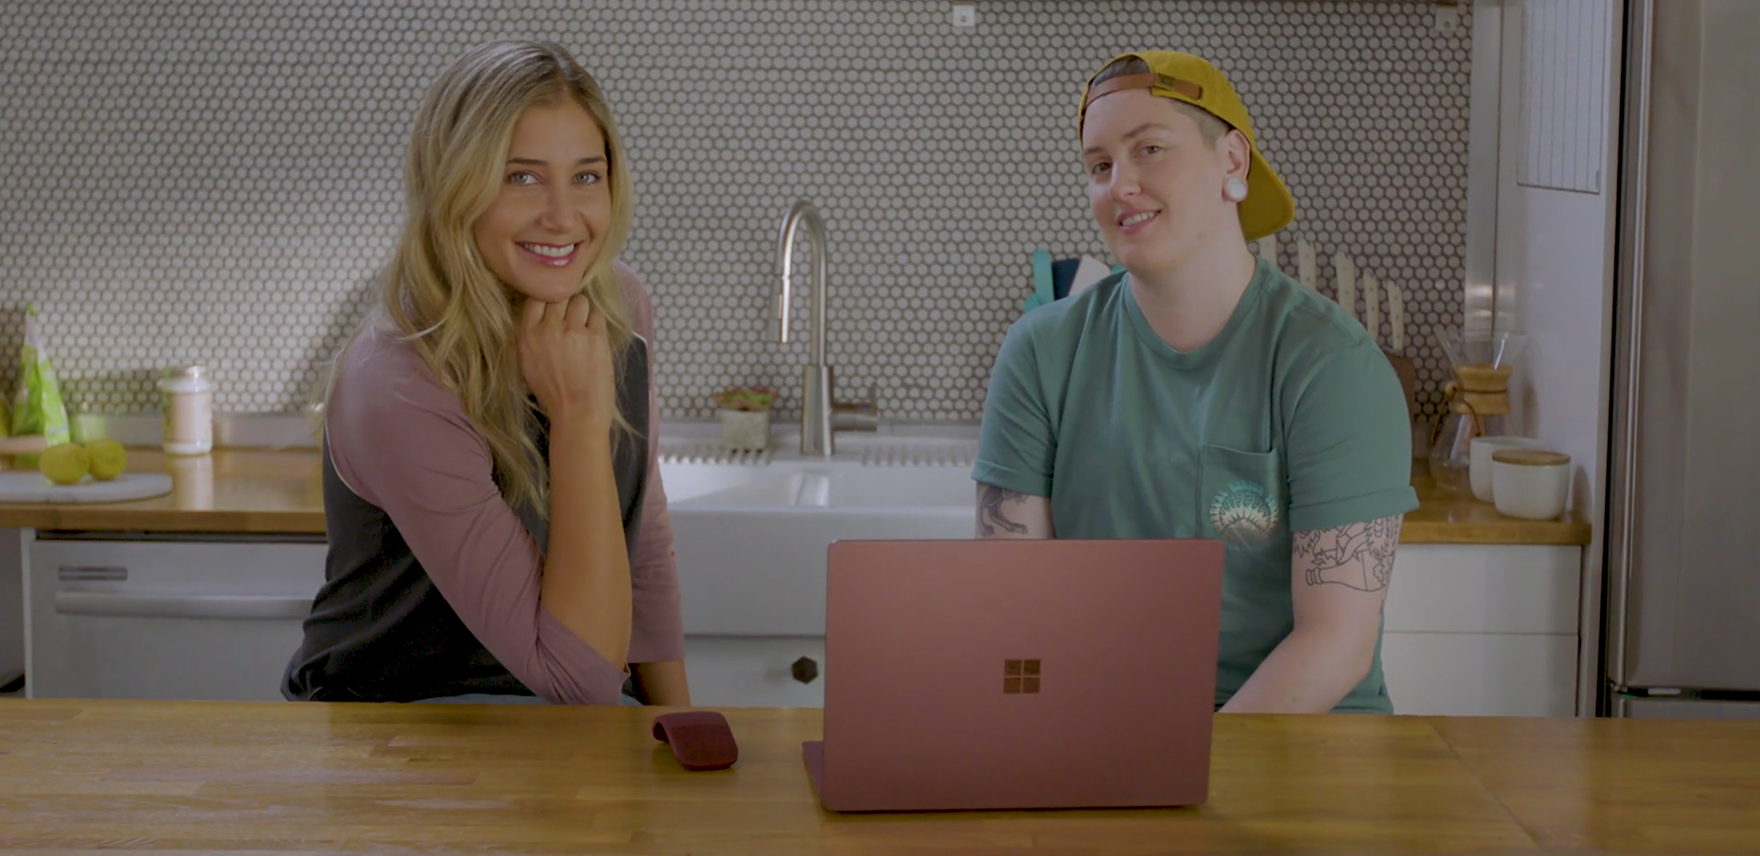 Alex Thomopoulos and Ashlie Little sit in a kitchen in front of a Microsoft Surface